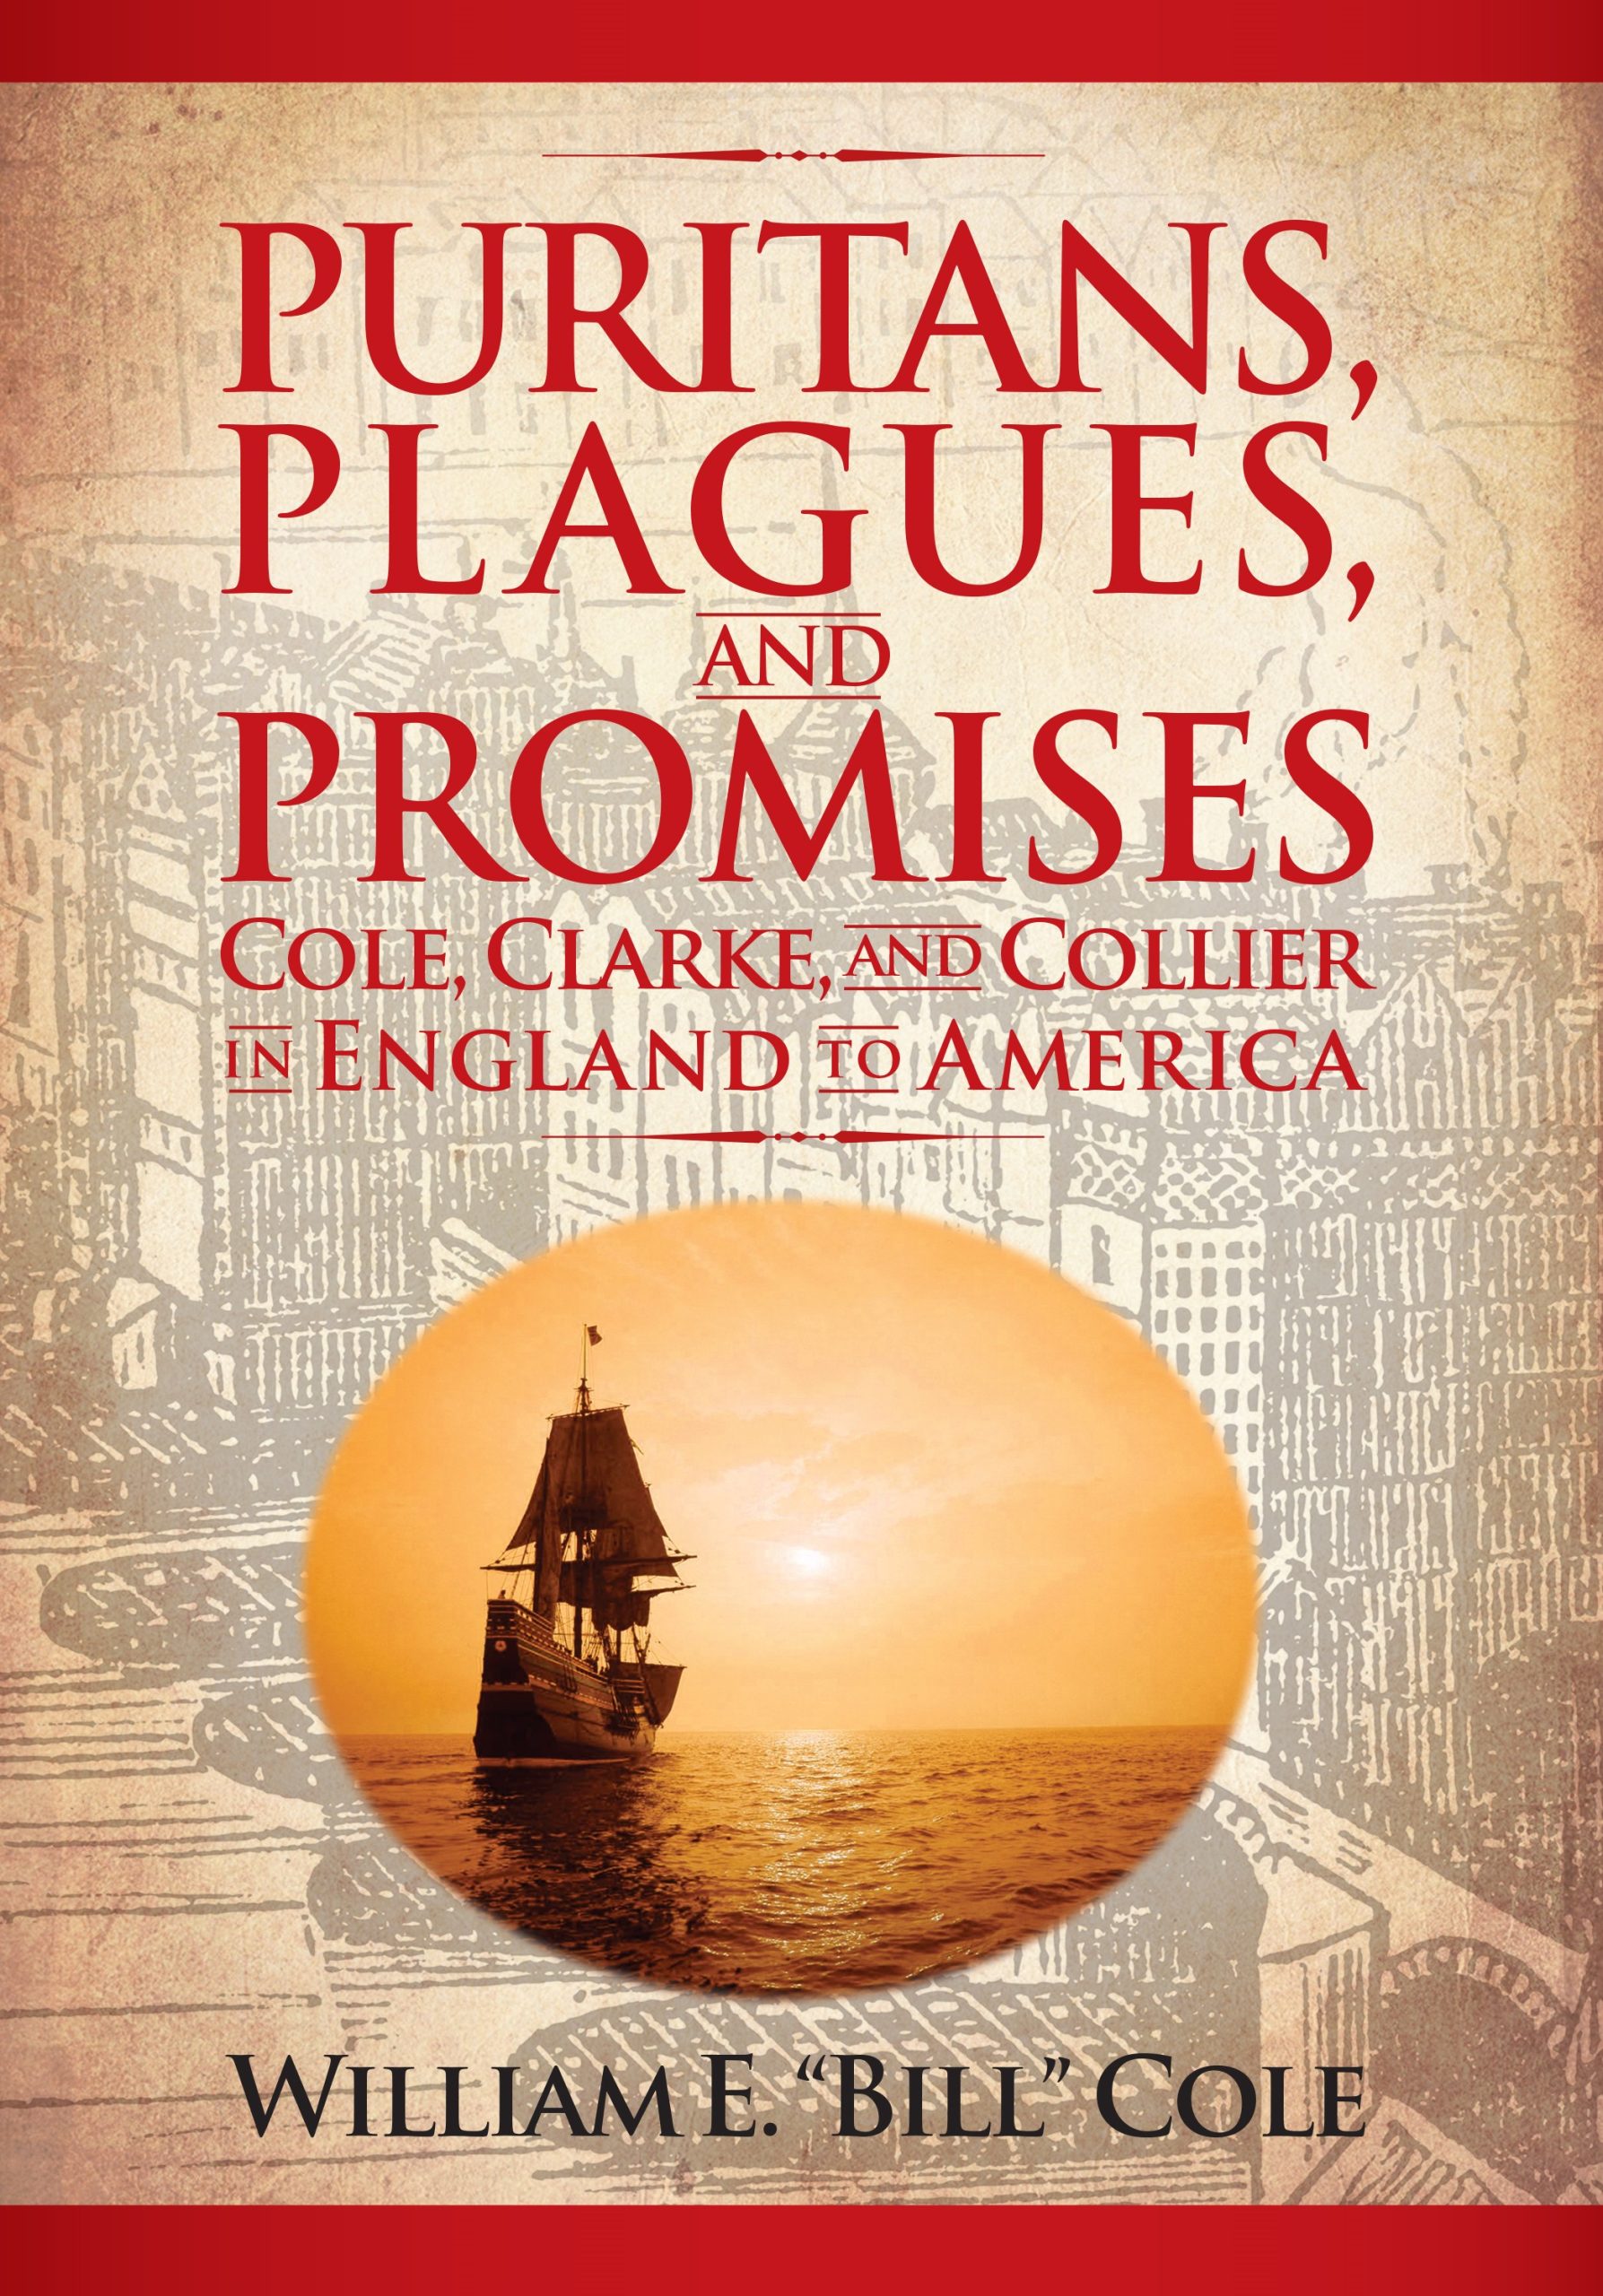 Puritans, Plagues, and Promises by William E. “Bill” Cole. Click on image to enlarge and PREVIEW THE BACK COVER